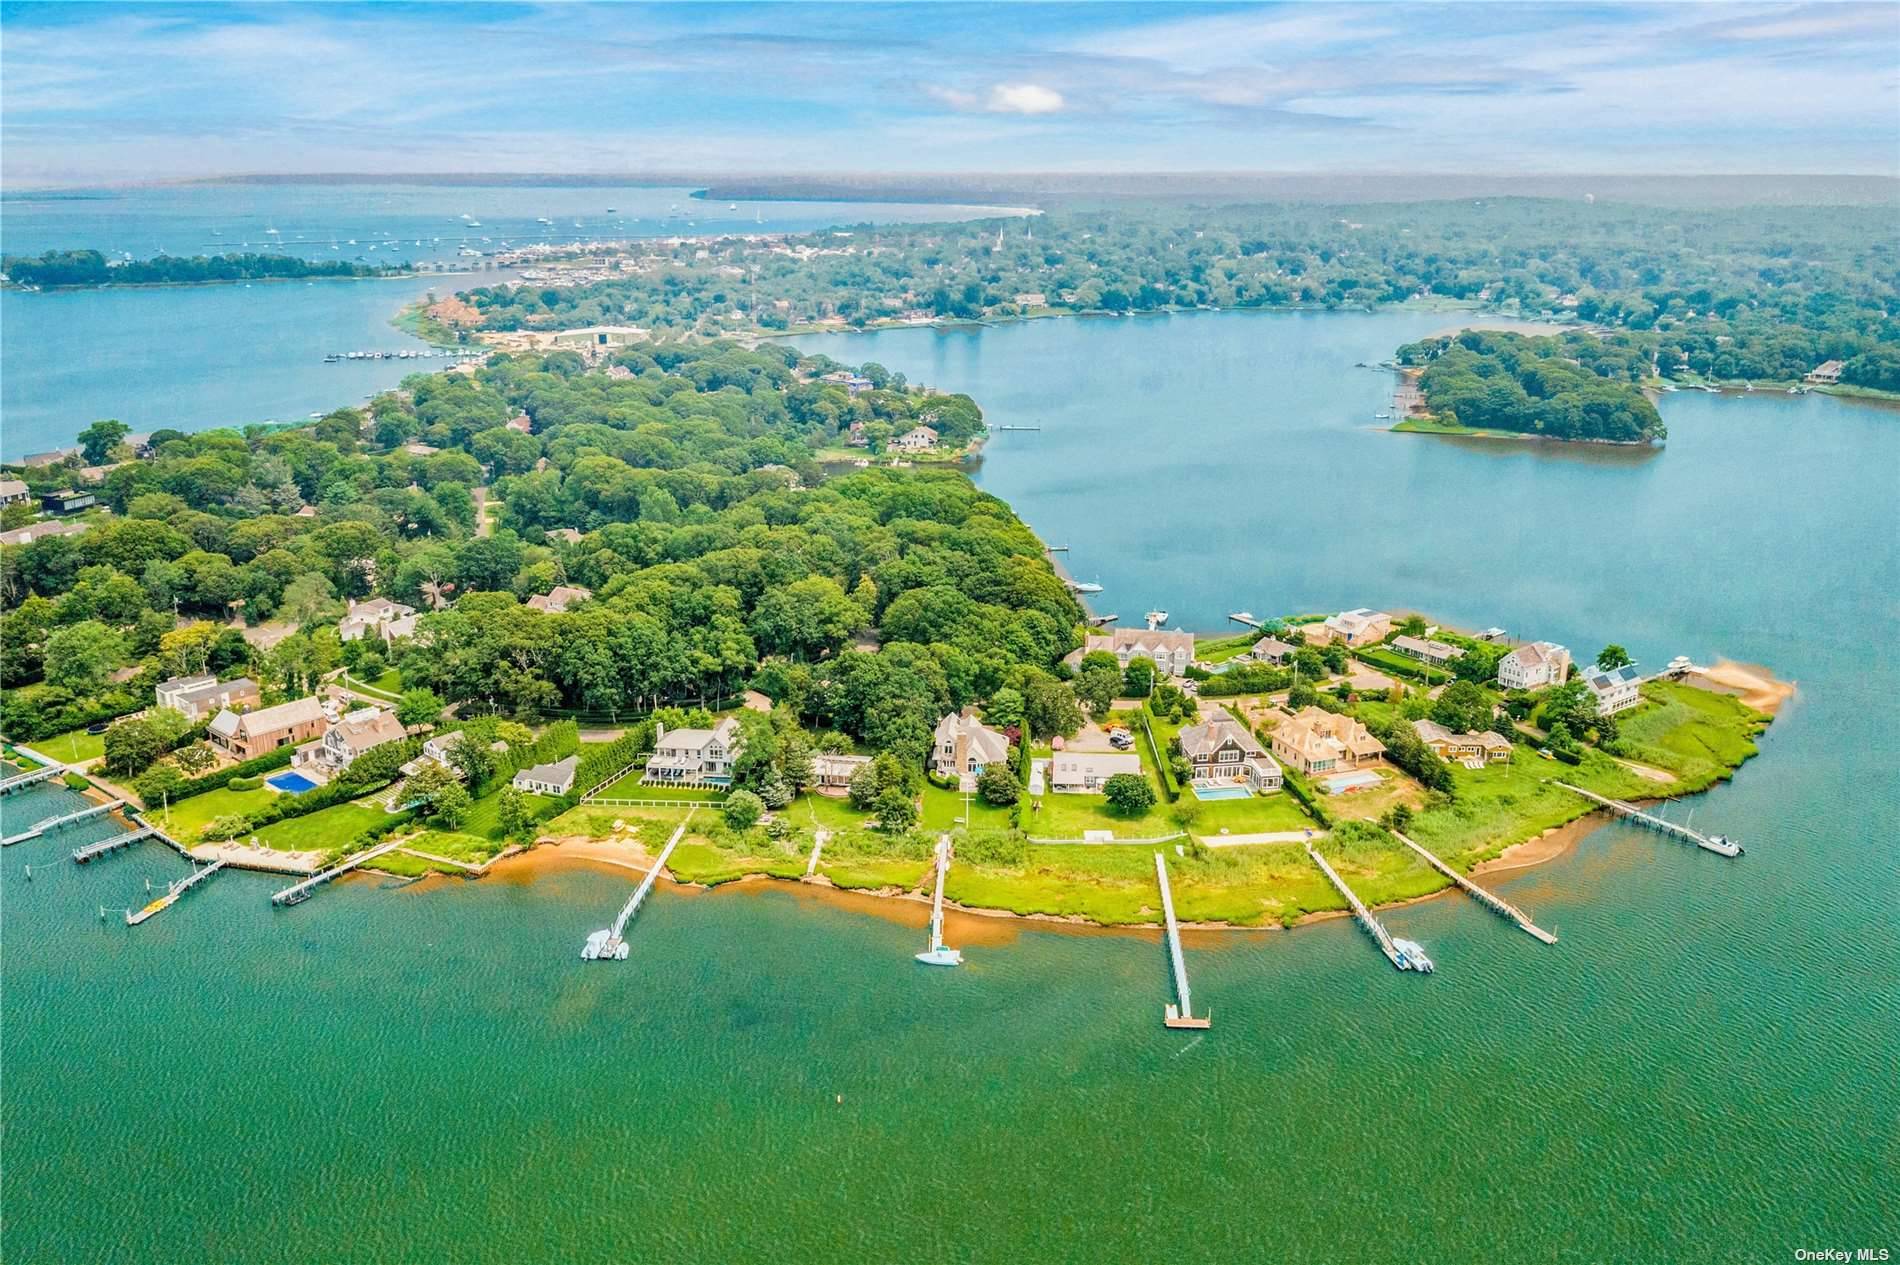 Located in Sag Harbor Village, this west facing property is quietly situated on Redwood's most desirable stretch, less than a mile to the heart of town.